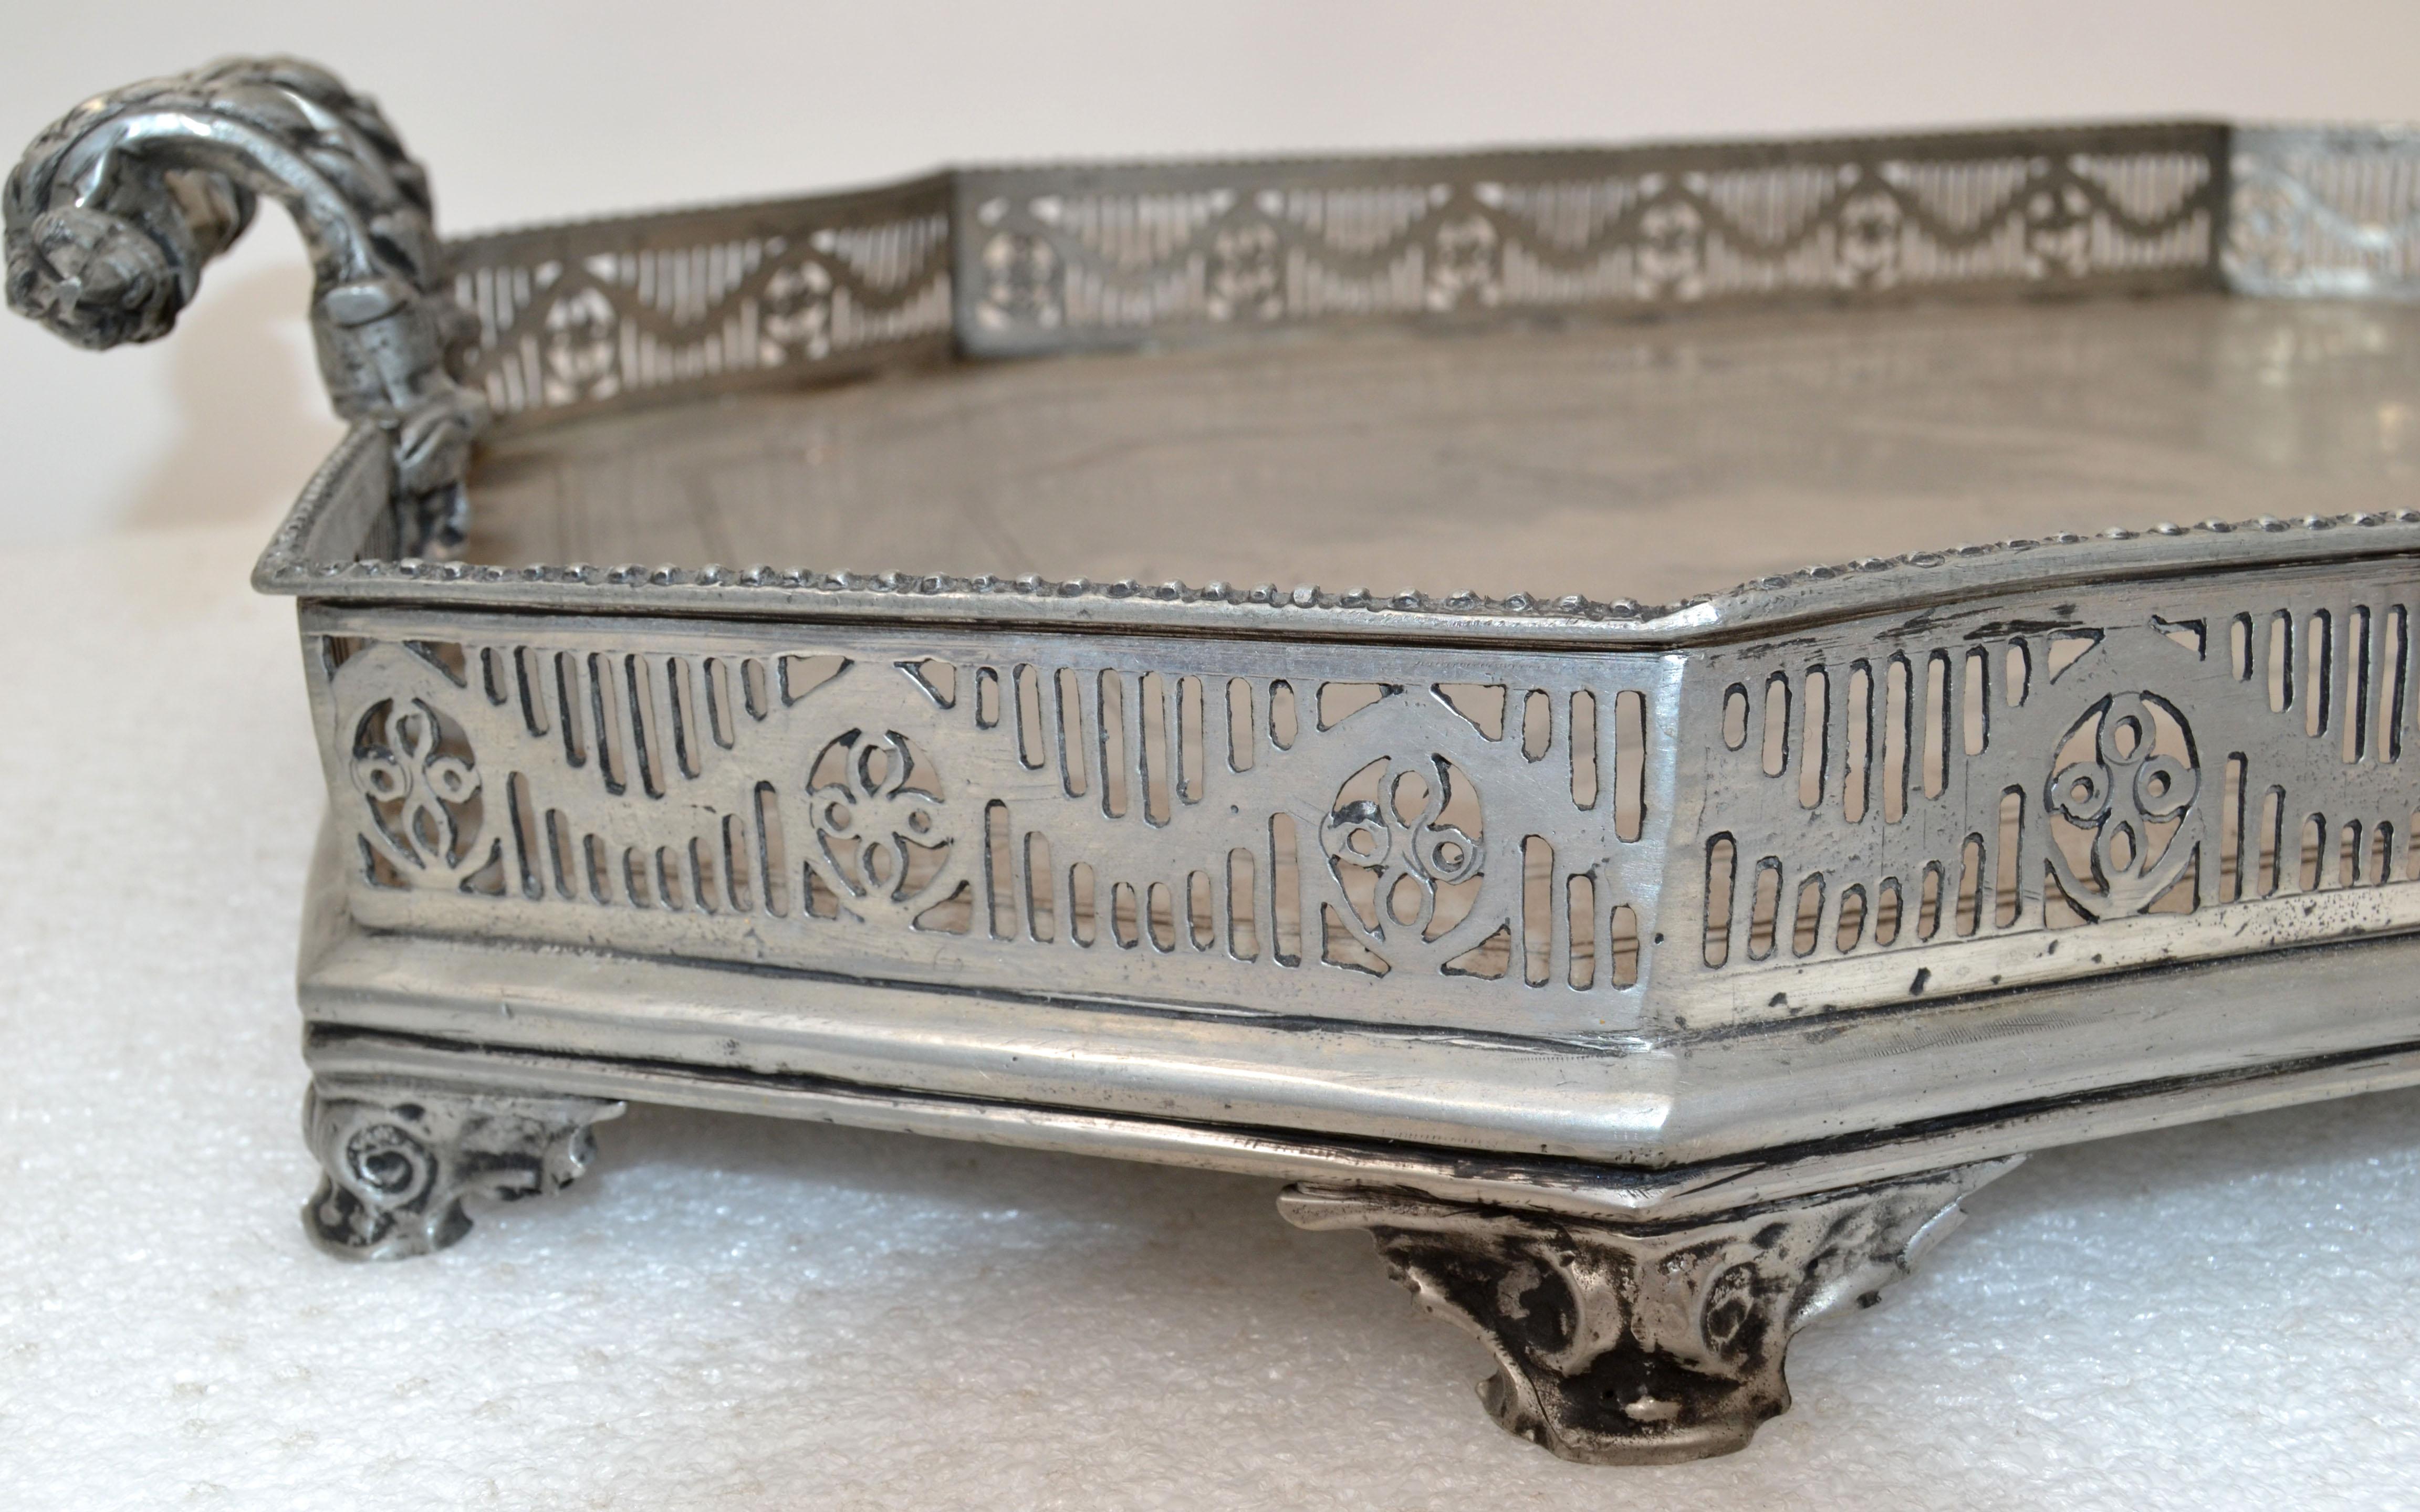 Hand-Crafted Spanish Silver Ornate Large Footed Serving Tray with Handles Trademark